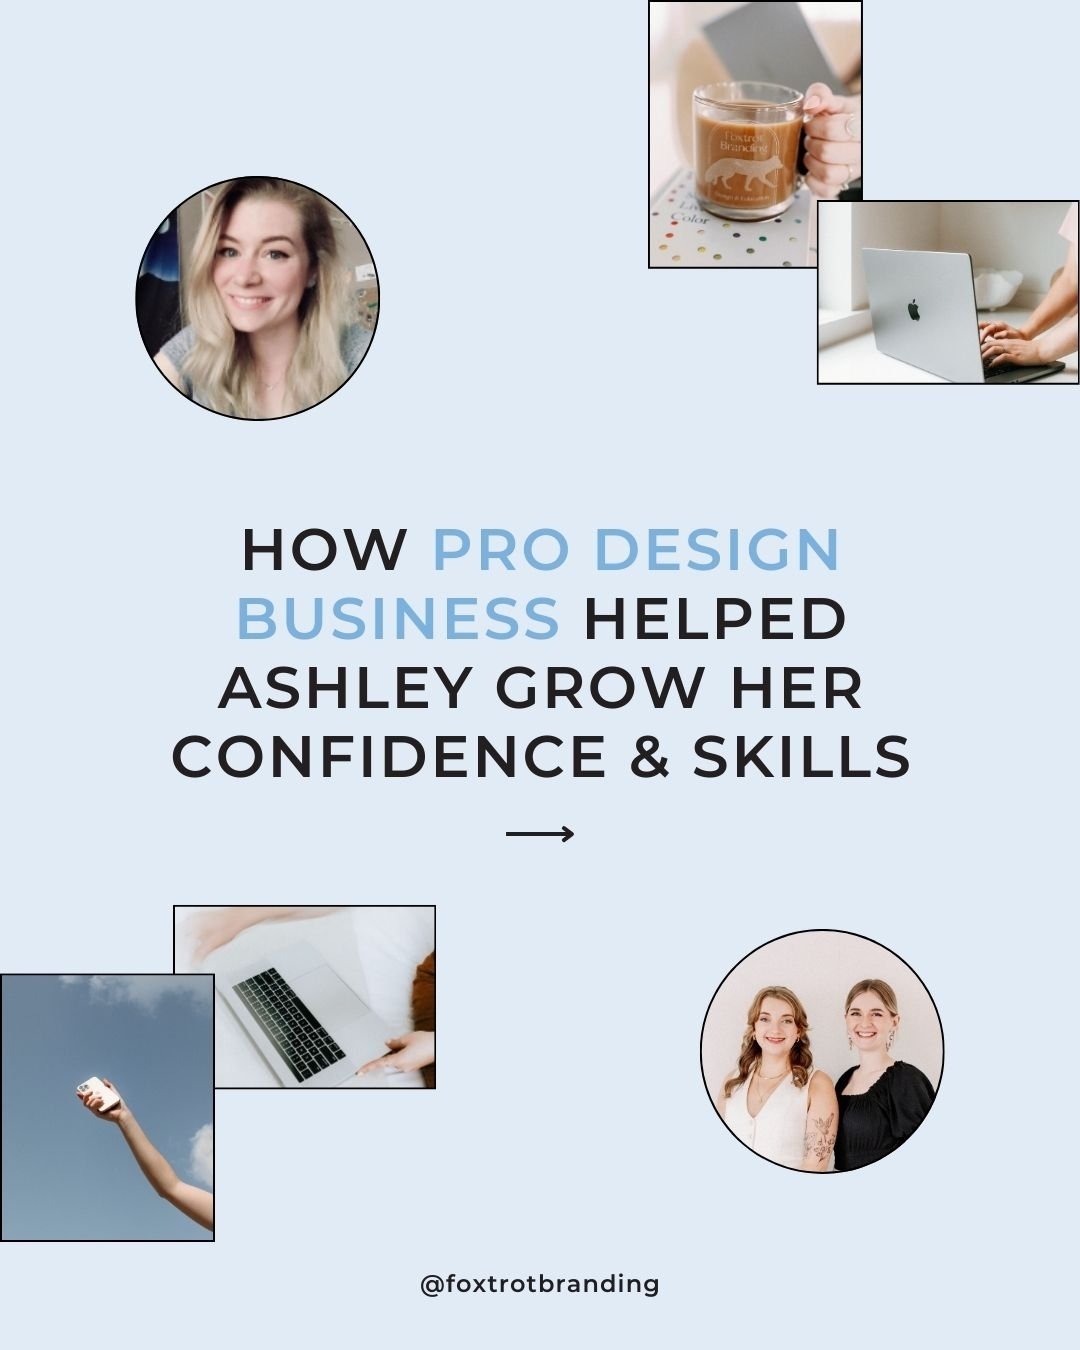 We asked Pro Design Business member, Ashley, about how the course and coaching calls impacted her business and life...

Swipe to see what Ashley had to say about how the course helped give her the confidence boost and skill level-up she needed in her